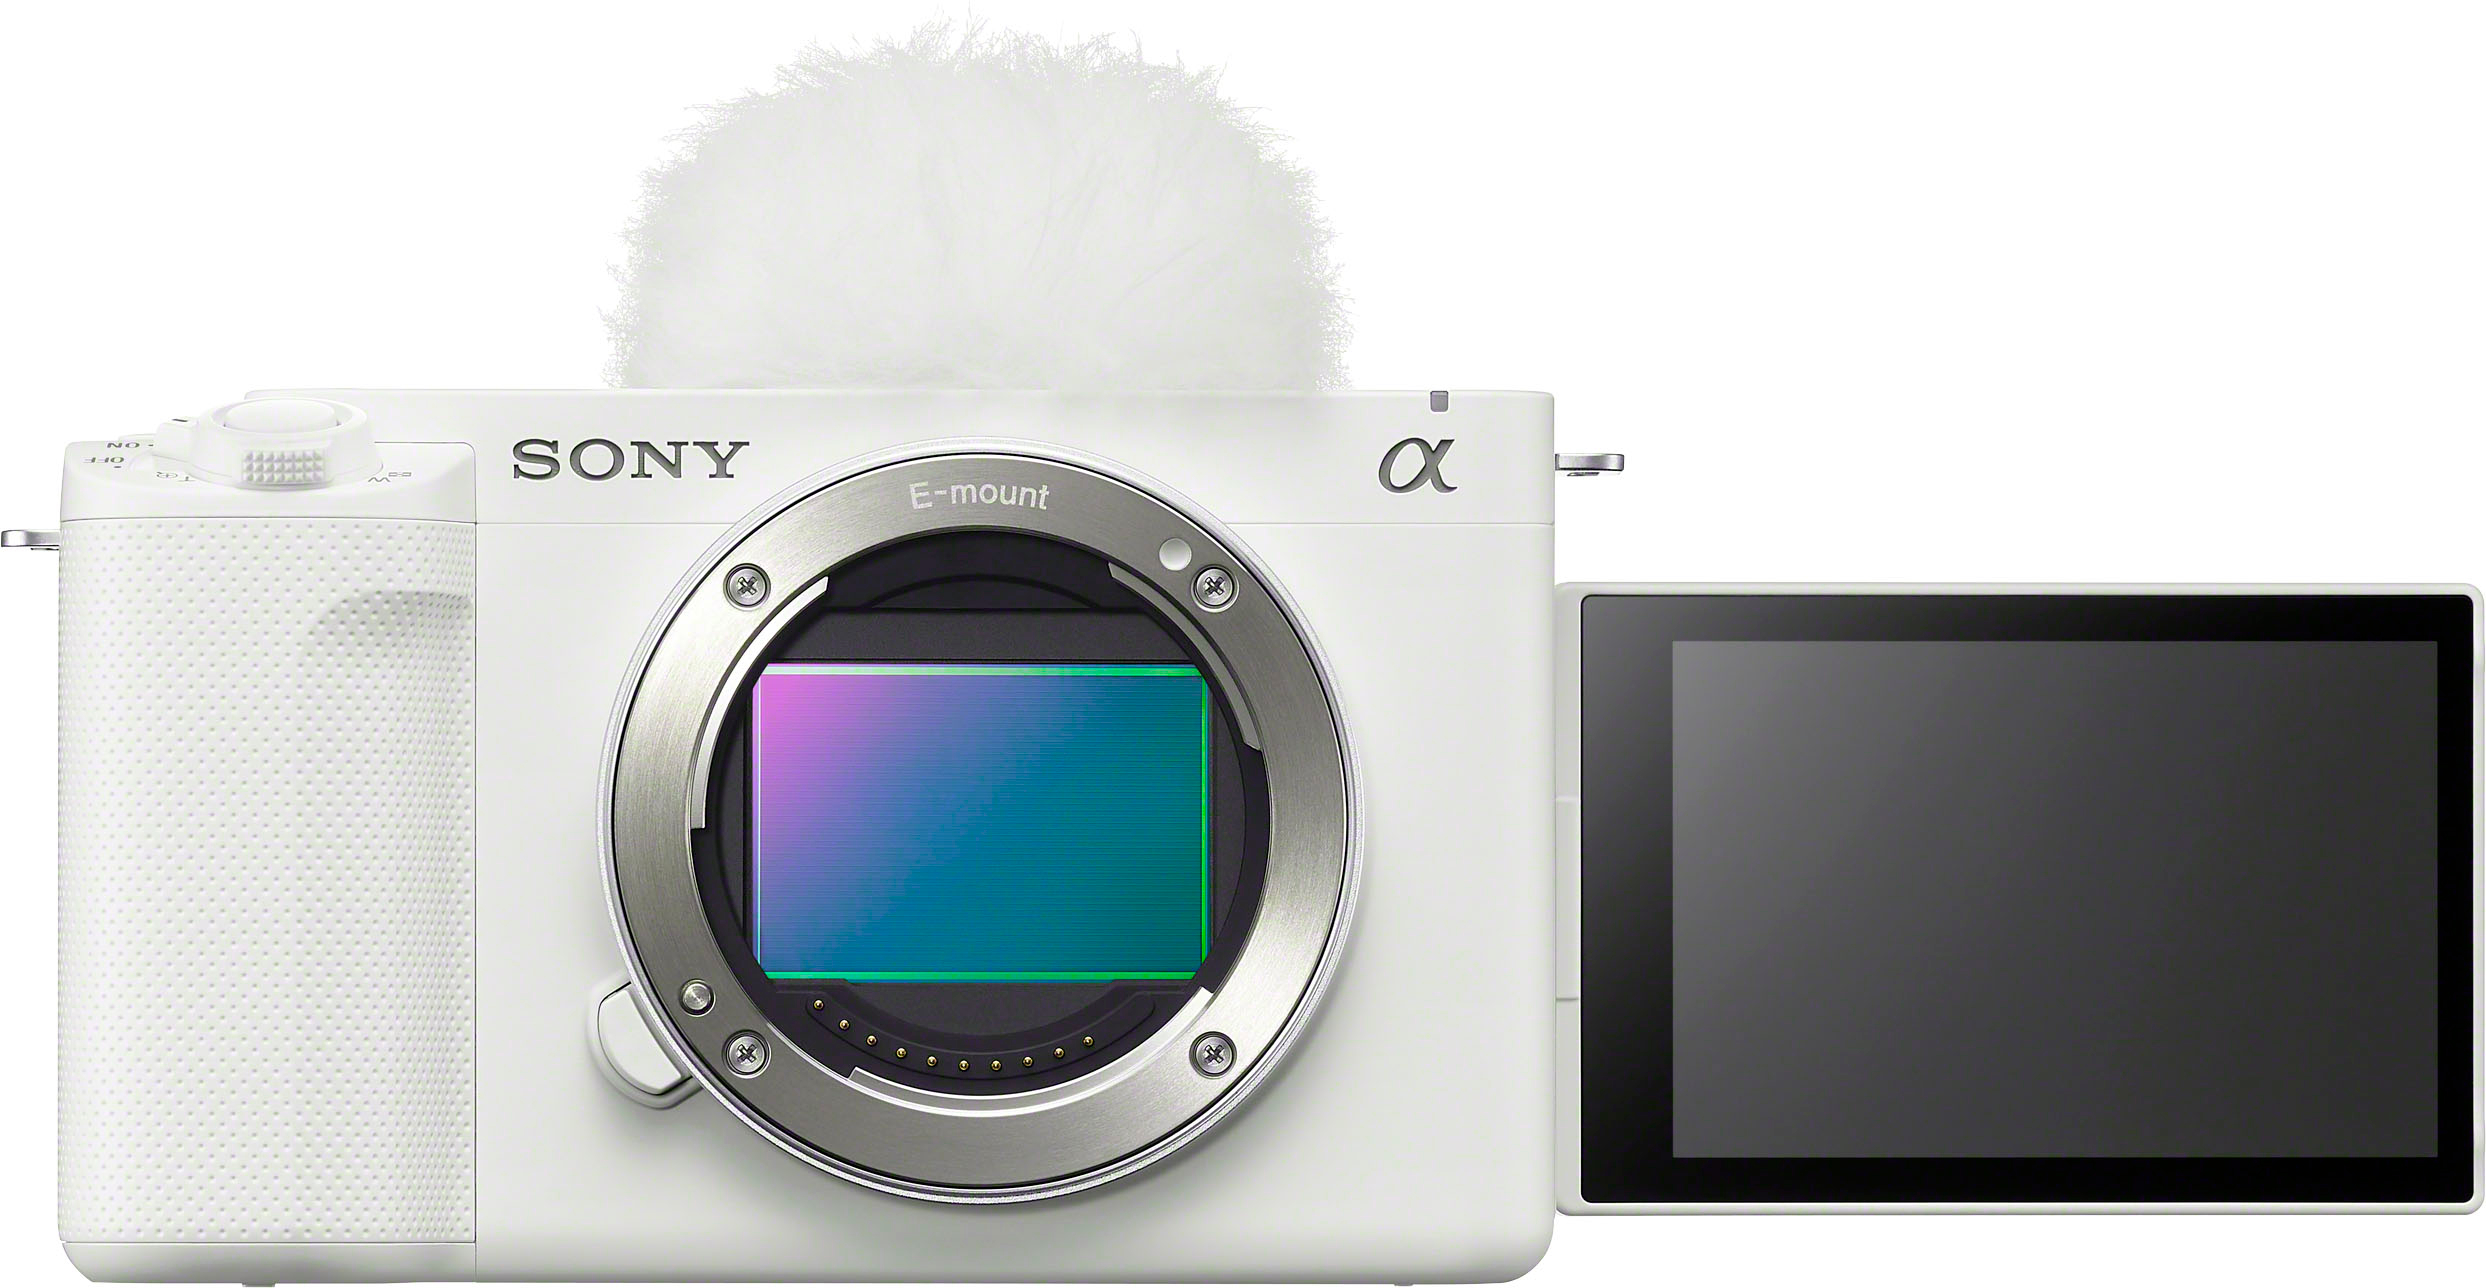 Sony Alpha 1 review: everything nice at an expensive price - The Verge